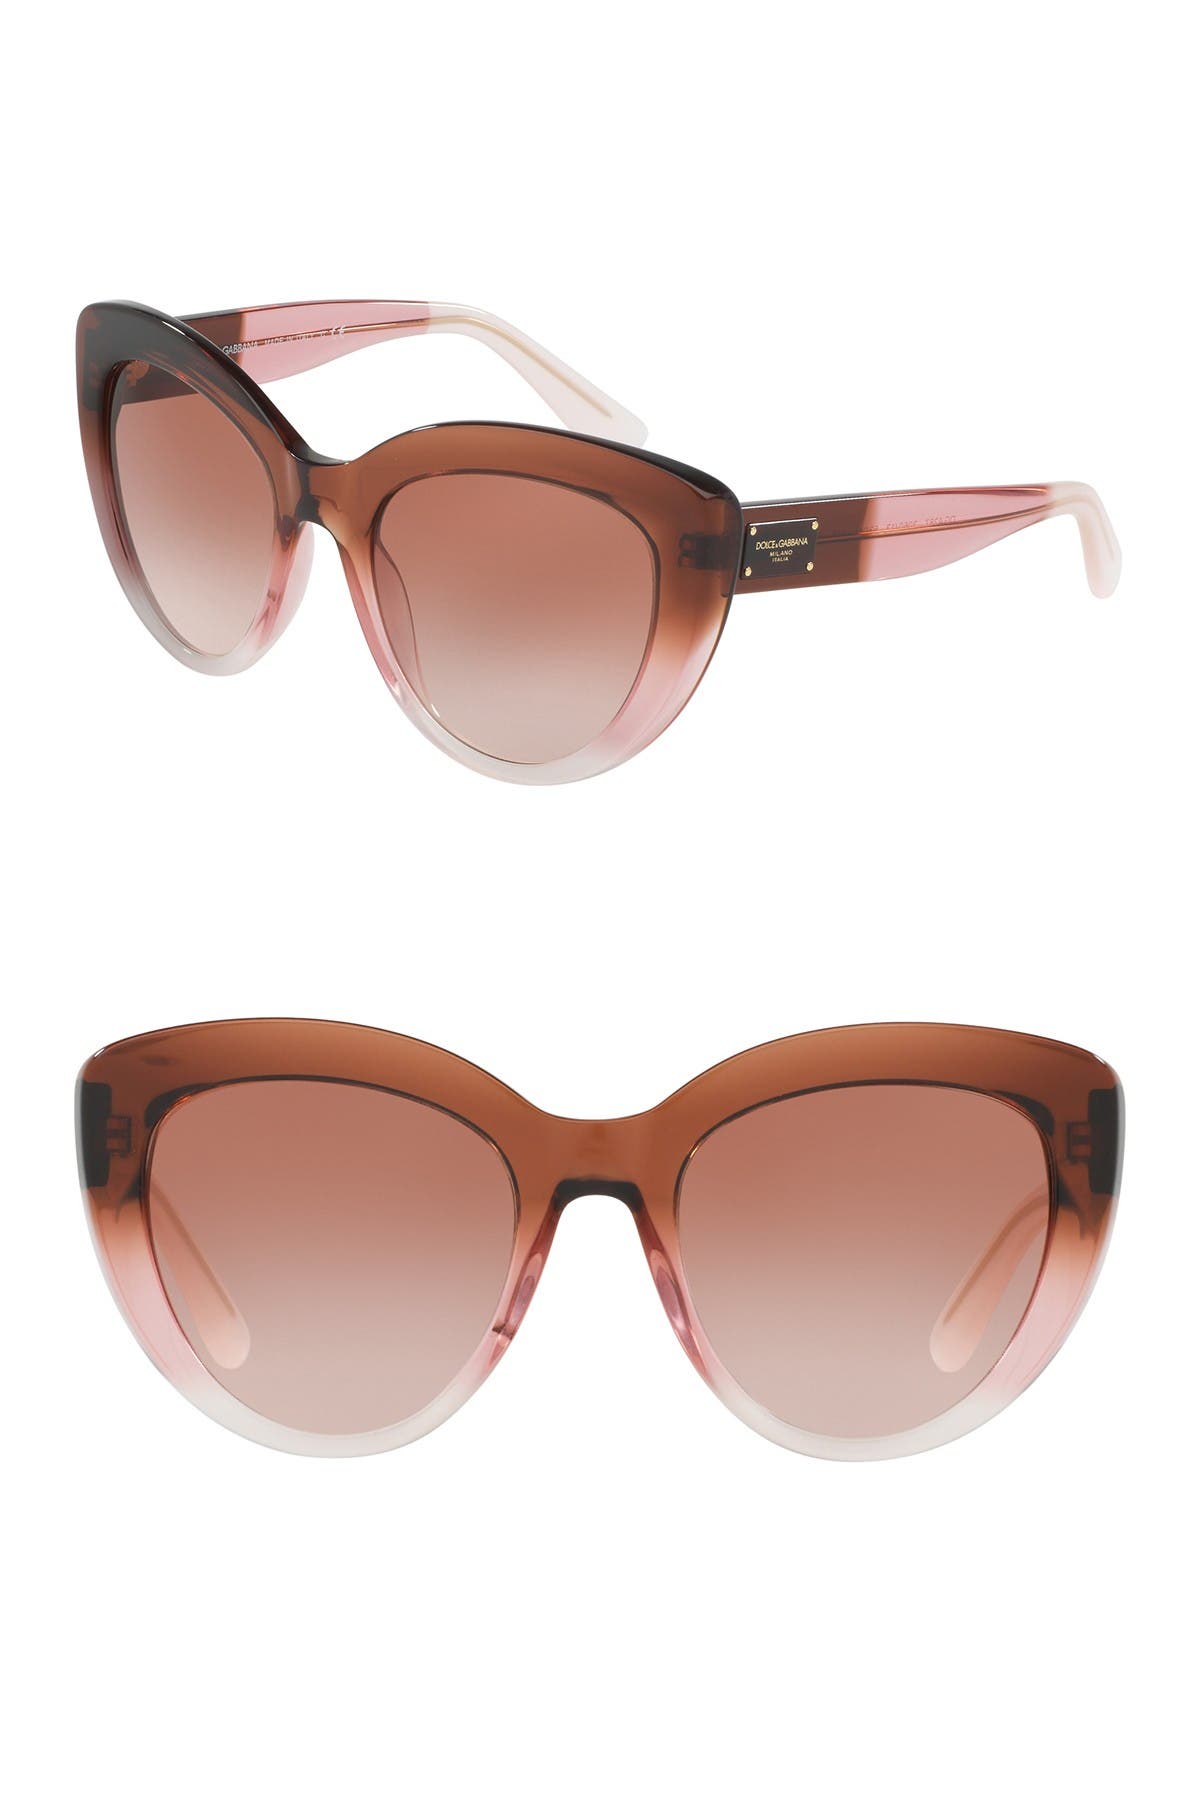 dolce and gabbana red cat eye glasses